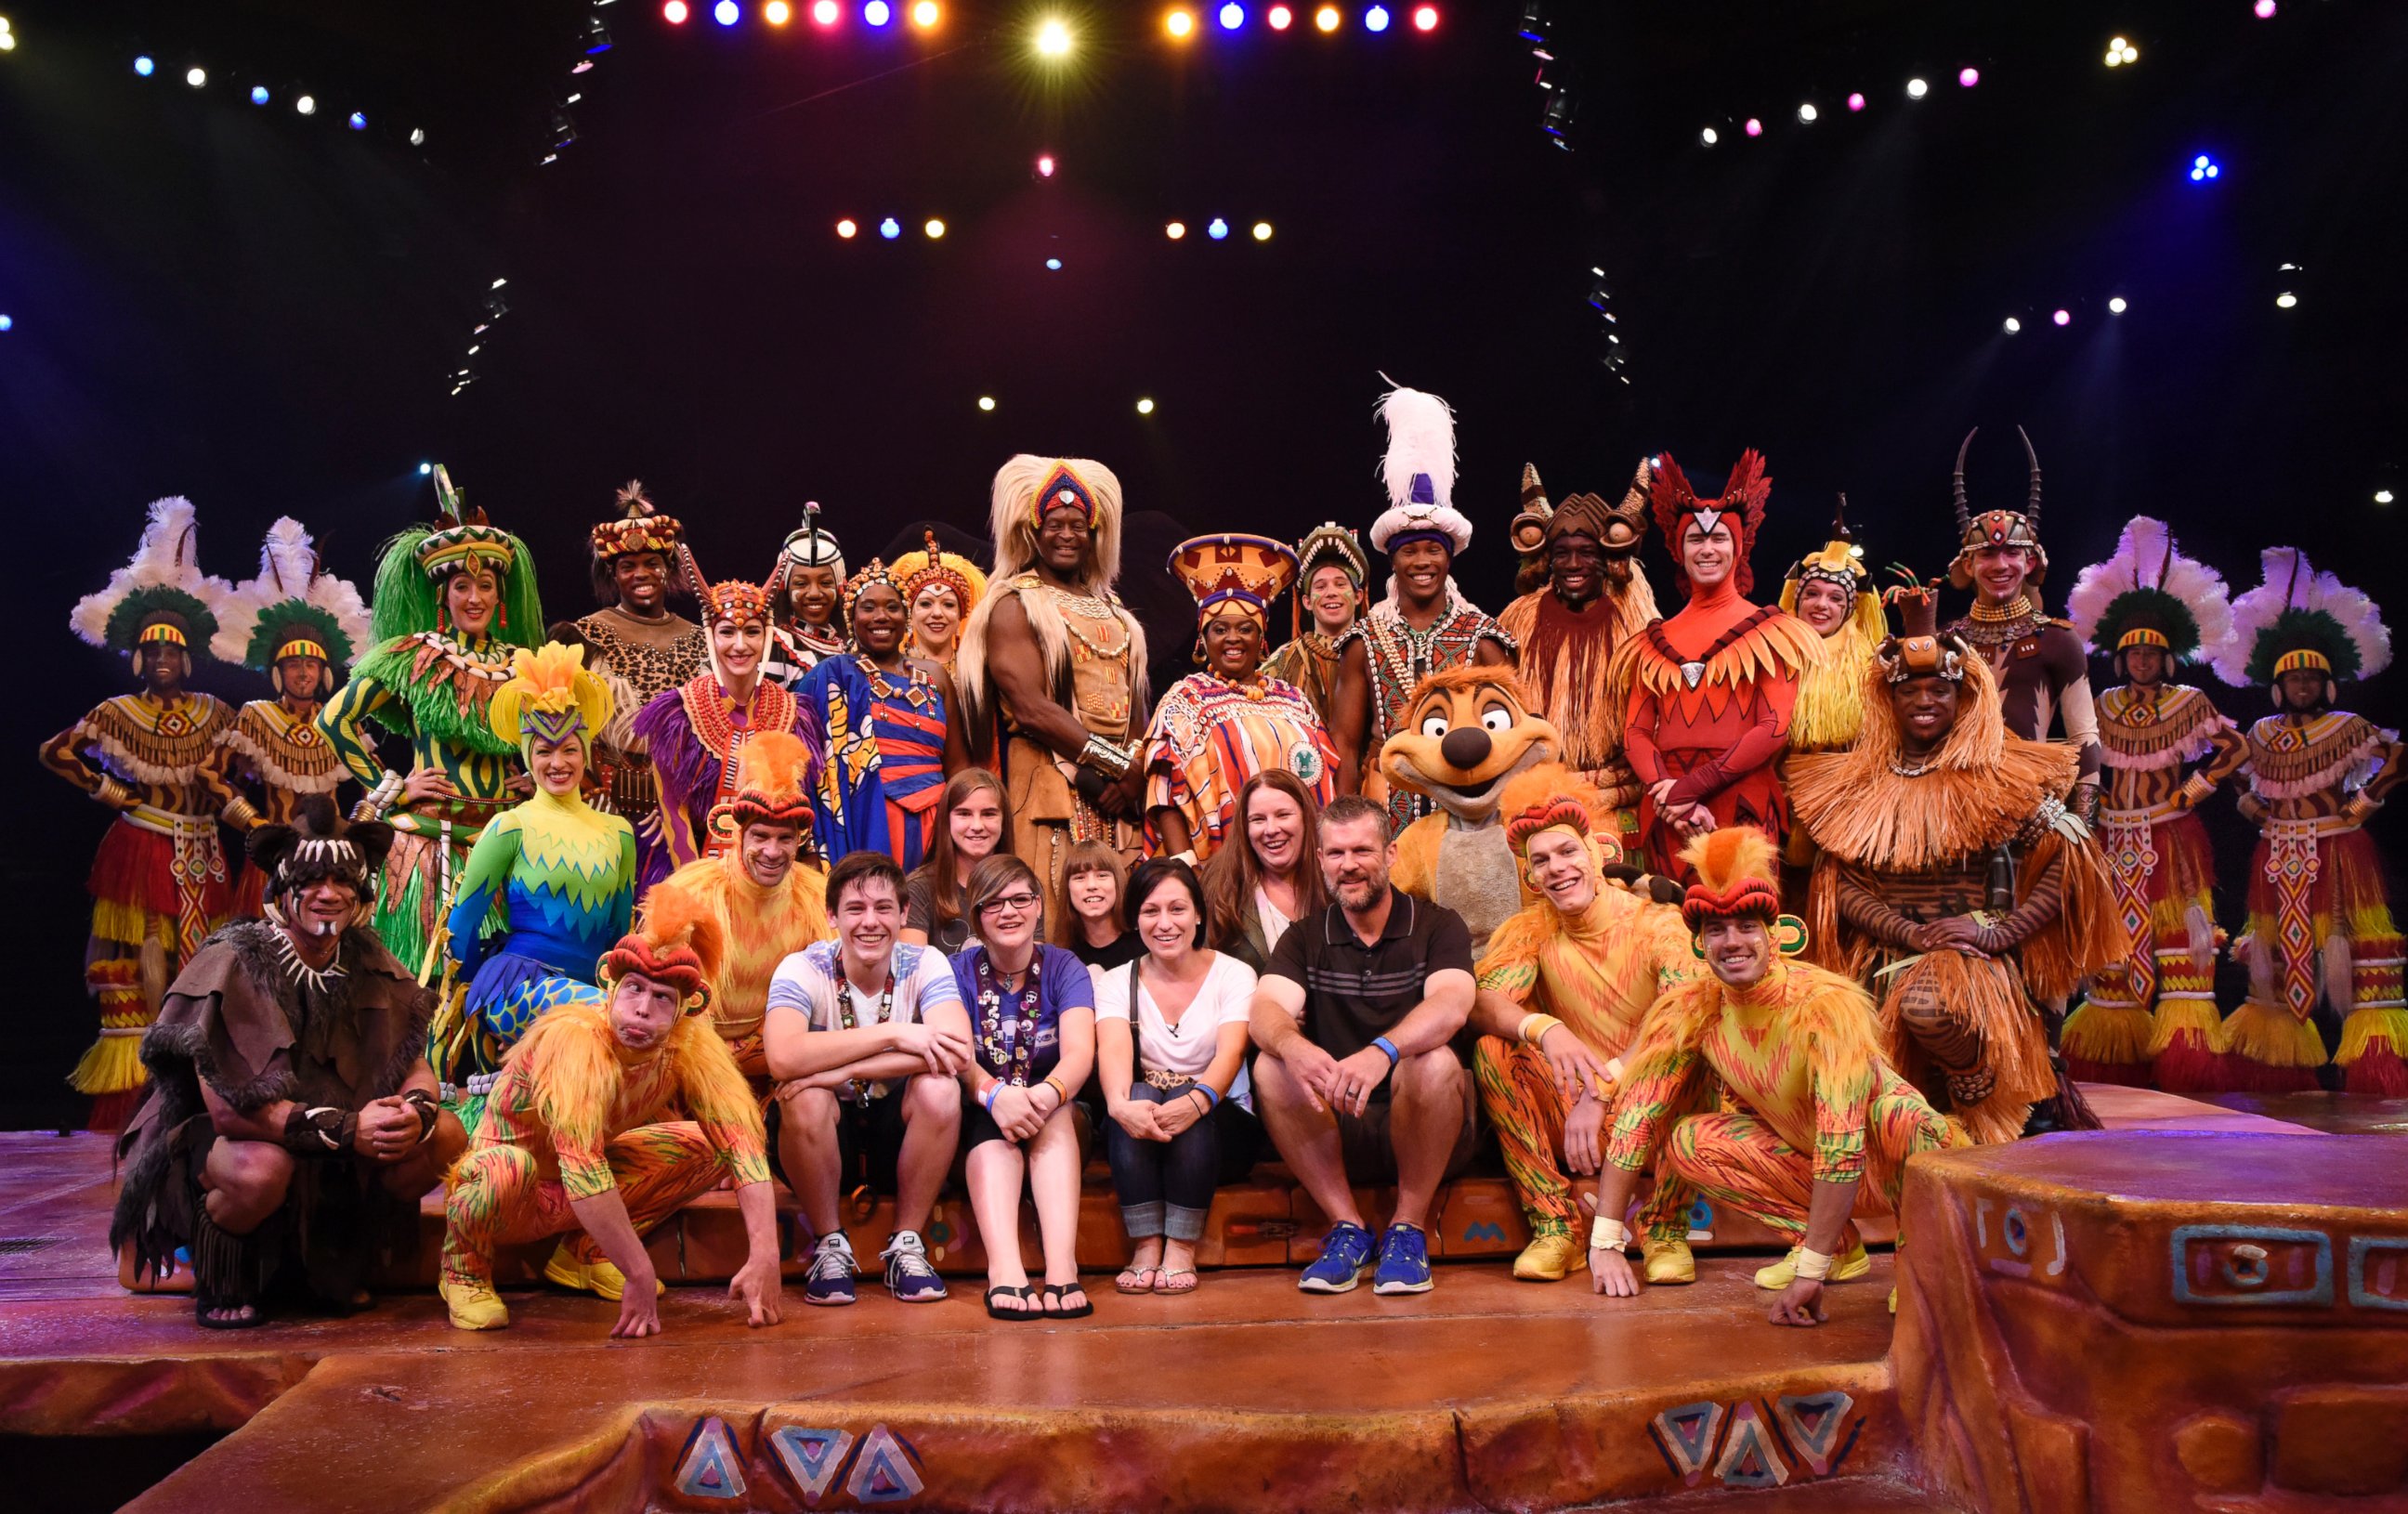 PHOTO: Oklahoma family celebrated a real "circle of life" moment at Disney's Animal Kingdom's Festival of the Lion King show with "Good Morning America Weekend" meteorologist Rob Marciano. 